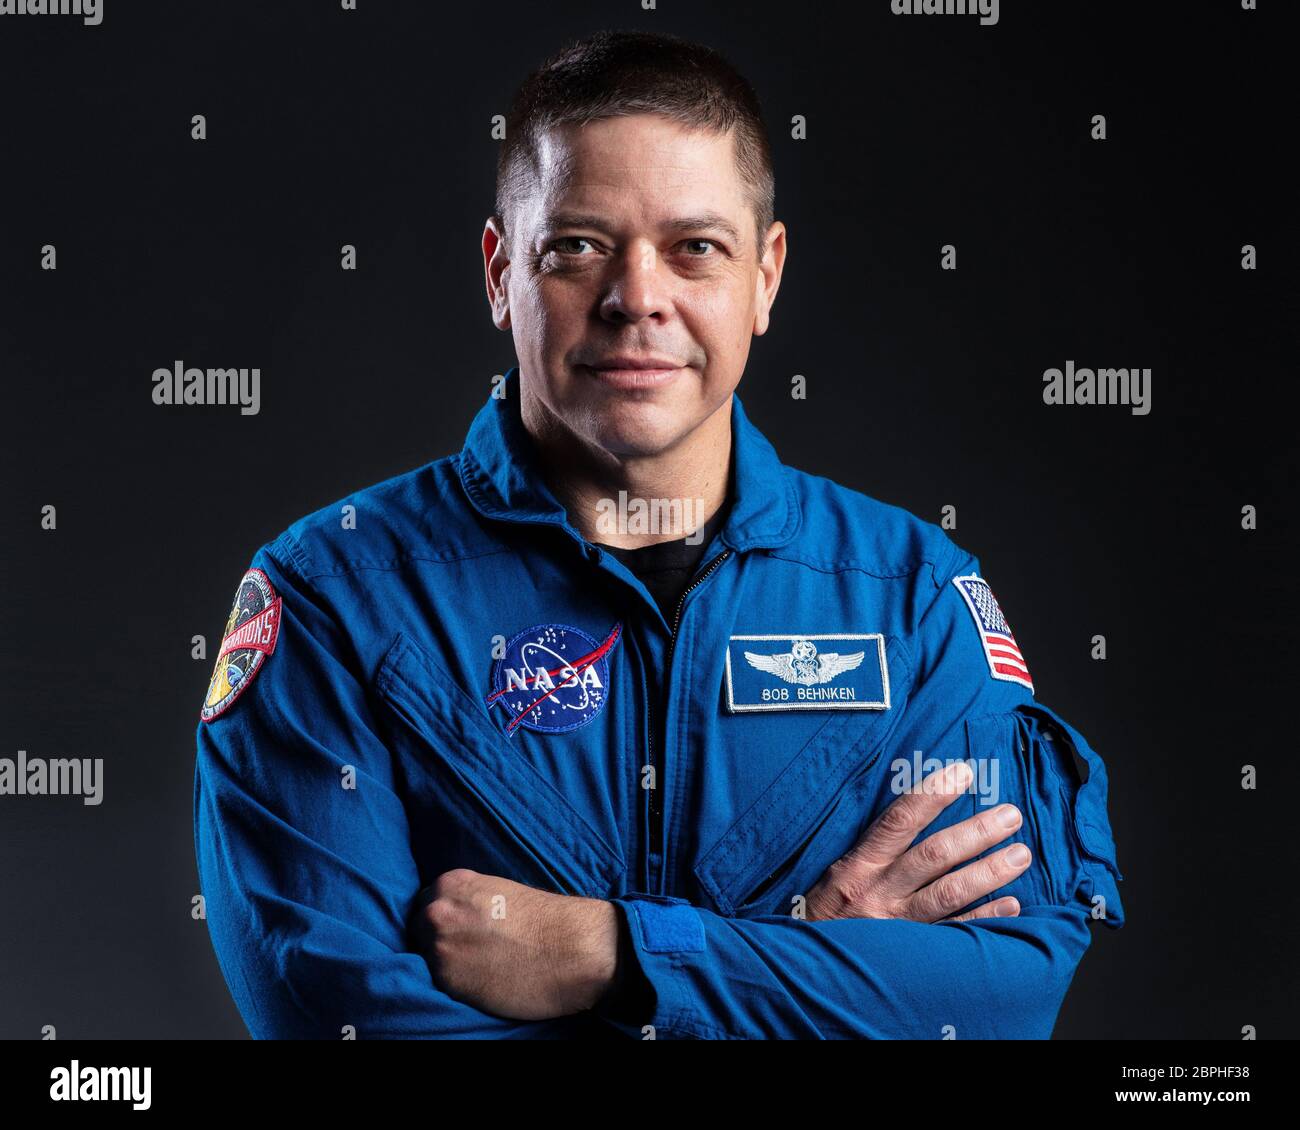 NASA astronaut Robert Behnken, pictured here on November 7, 2018, will launch to the International Space Station on the Demo-2 mission. SpaceX and NASA are targeting May 27 for Falcon 9's launch of Crew Dragon's second demonstration mission (Demo-2) from historic Launch Complex 39A at NASA's Kennedy Space Center in Florida as part of NASA's Commercial Crew Program. NASA astronauts Bob Behnken and Doug Hurley will be the first two NASA astronauts to fly onboard the Dragon spacecraft to and from the International Space Station, which will return human spaceflight to the United States since the S Stock Photo